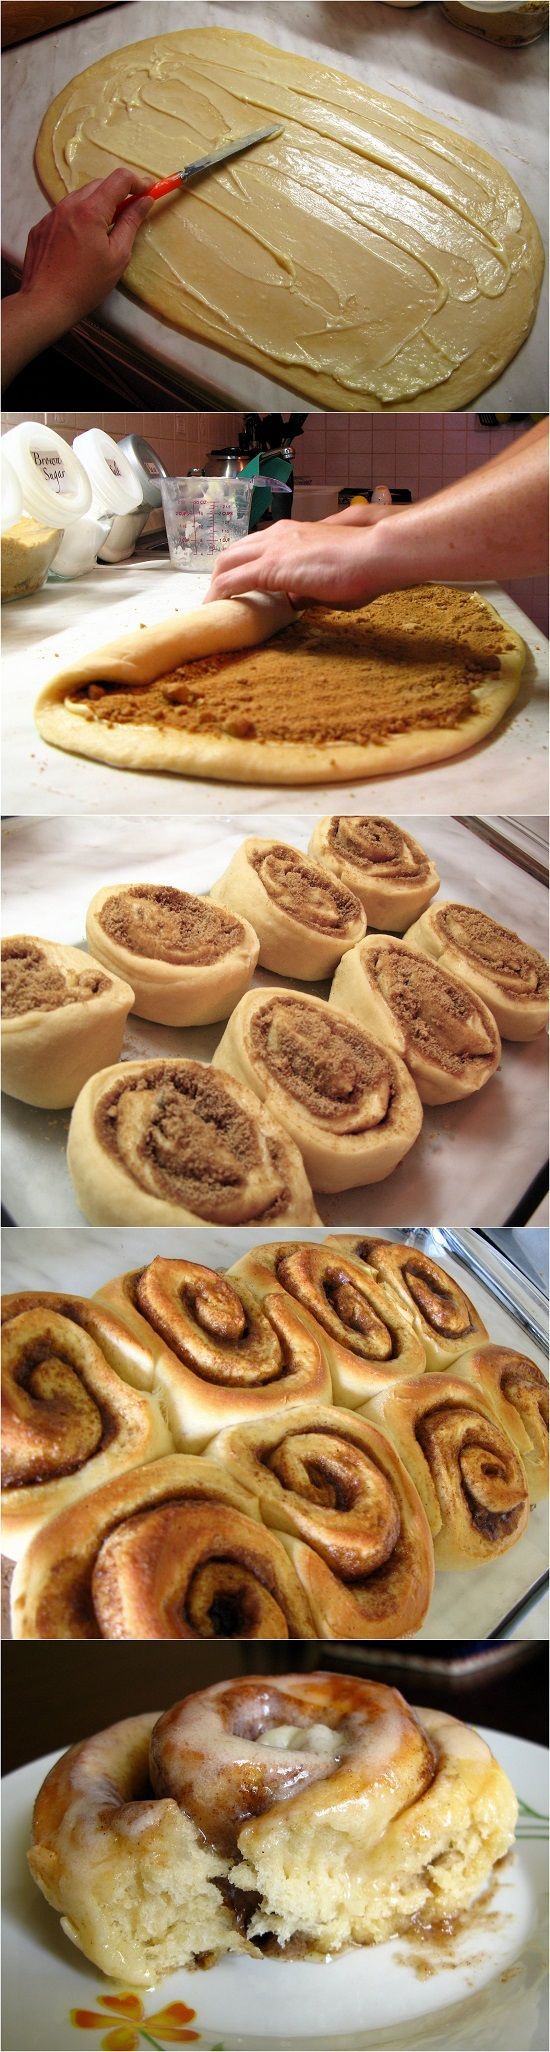 Easy Cinnamon Rolls – I love this recipe, I have done this with my son. The best